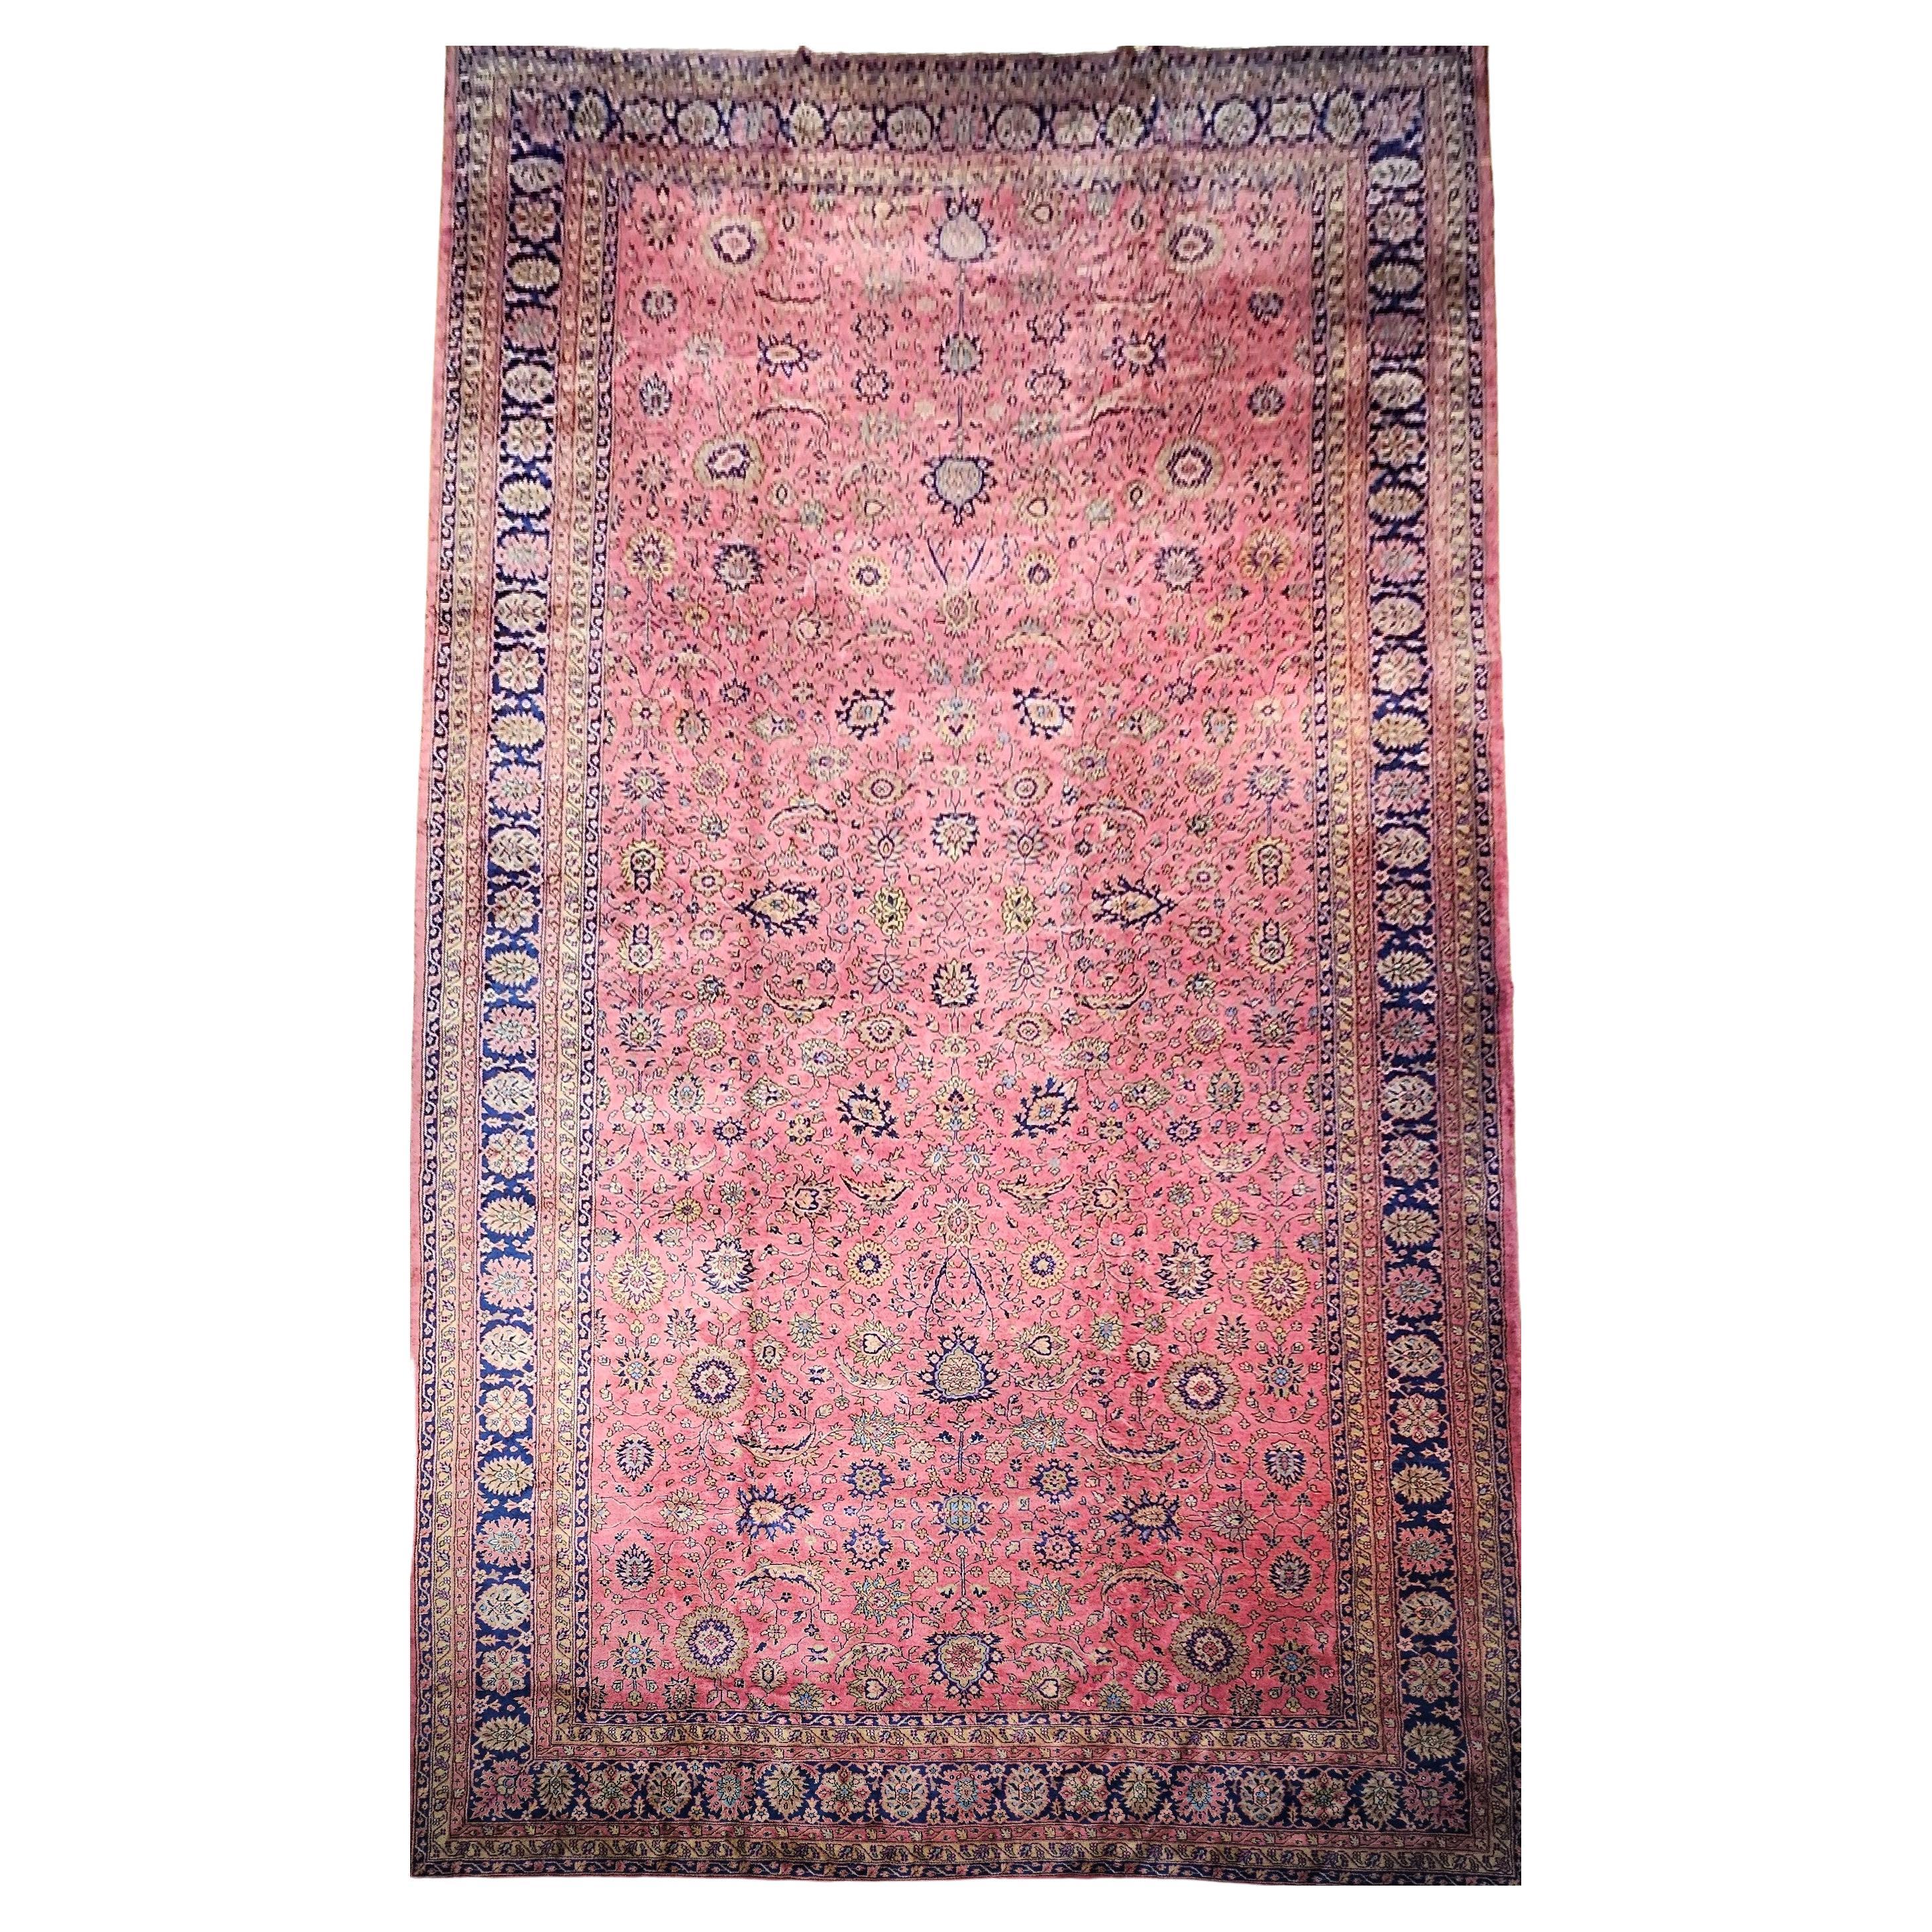 Vintage Oversize Turkish Rug in Allover Geometric Pattern in Pale Pink, Navy